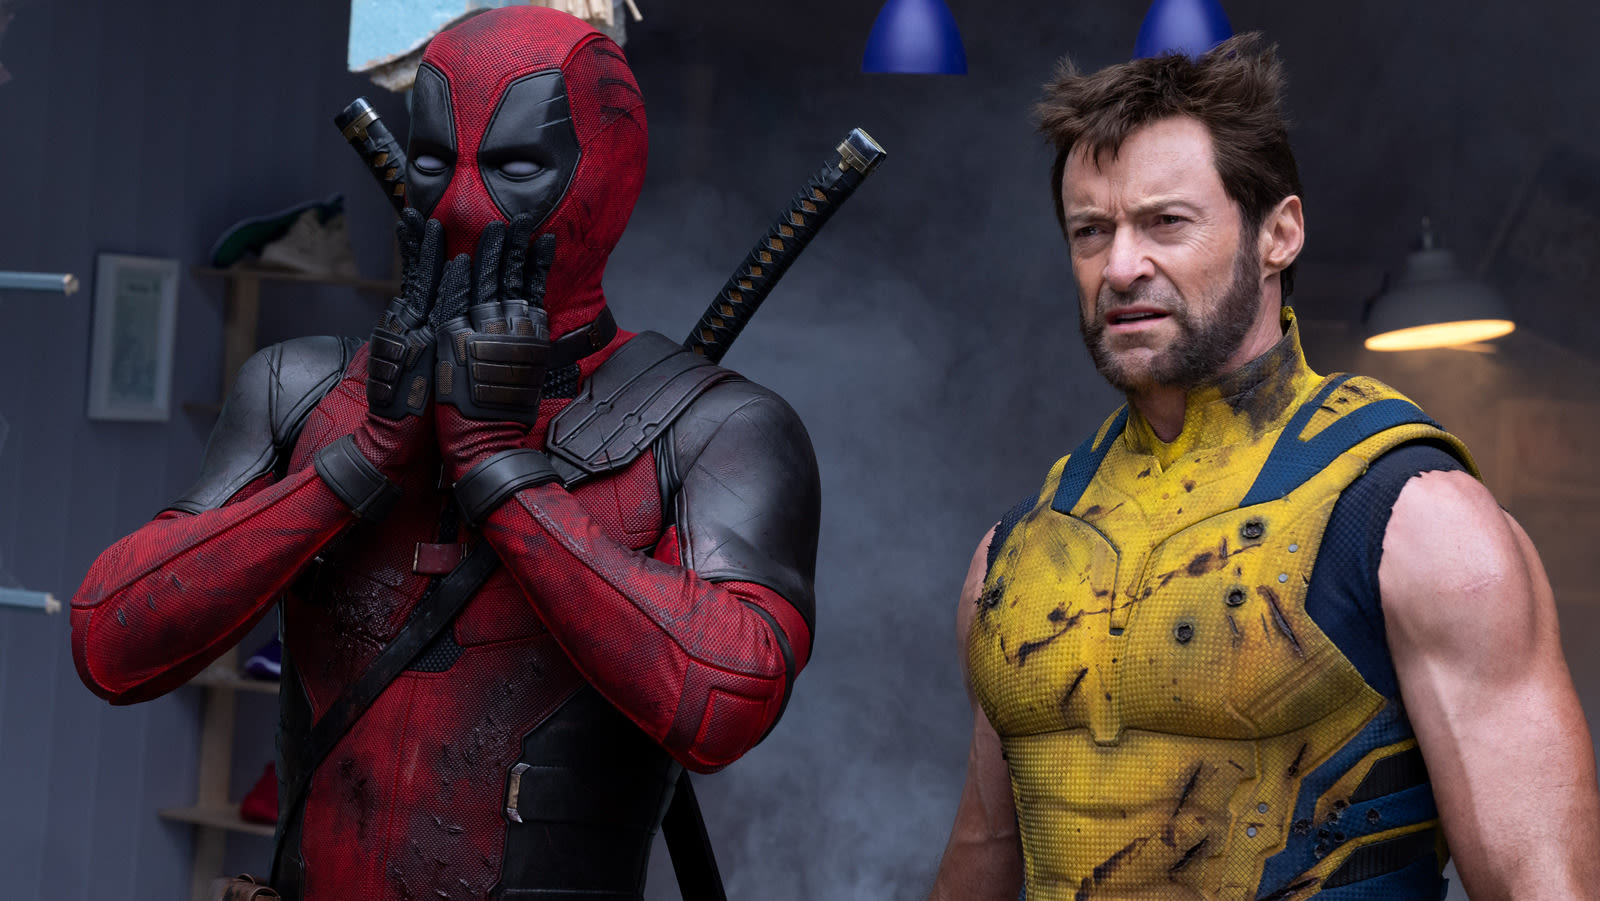 Deadpool & Wolverine cameos and spoilers are leaking after the premiere